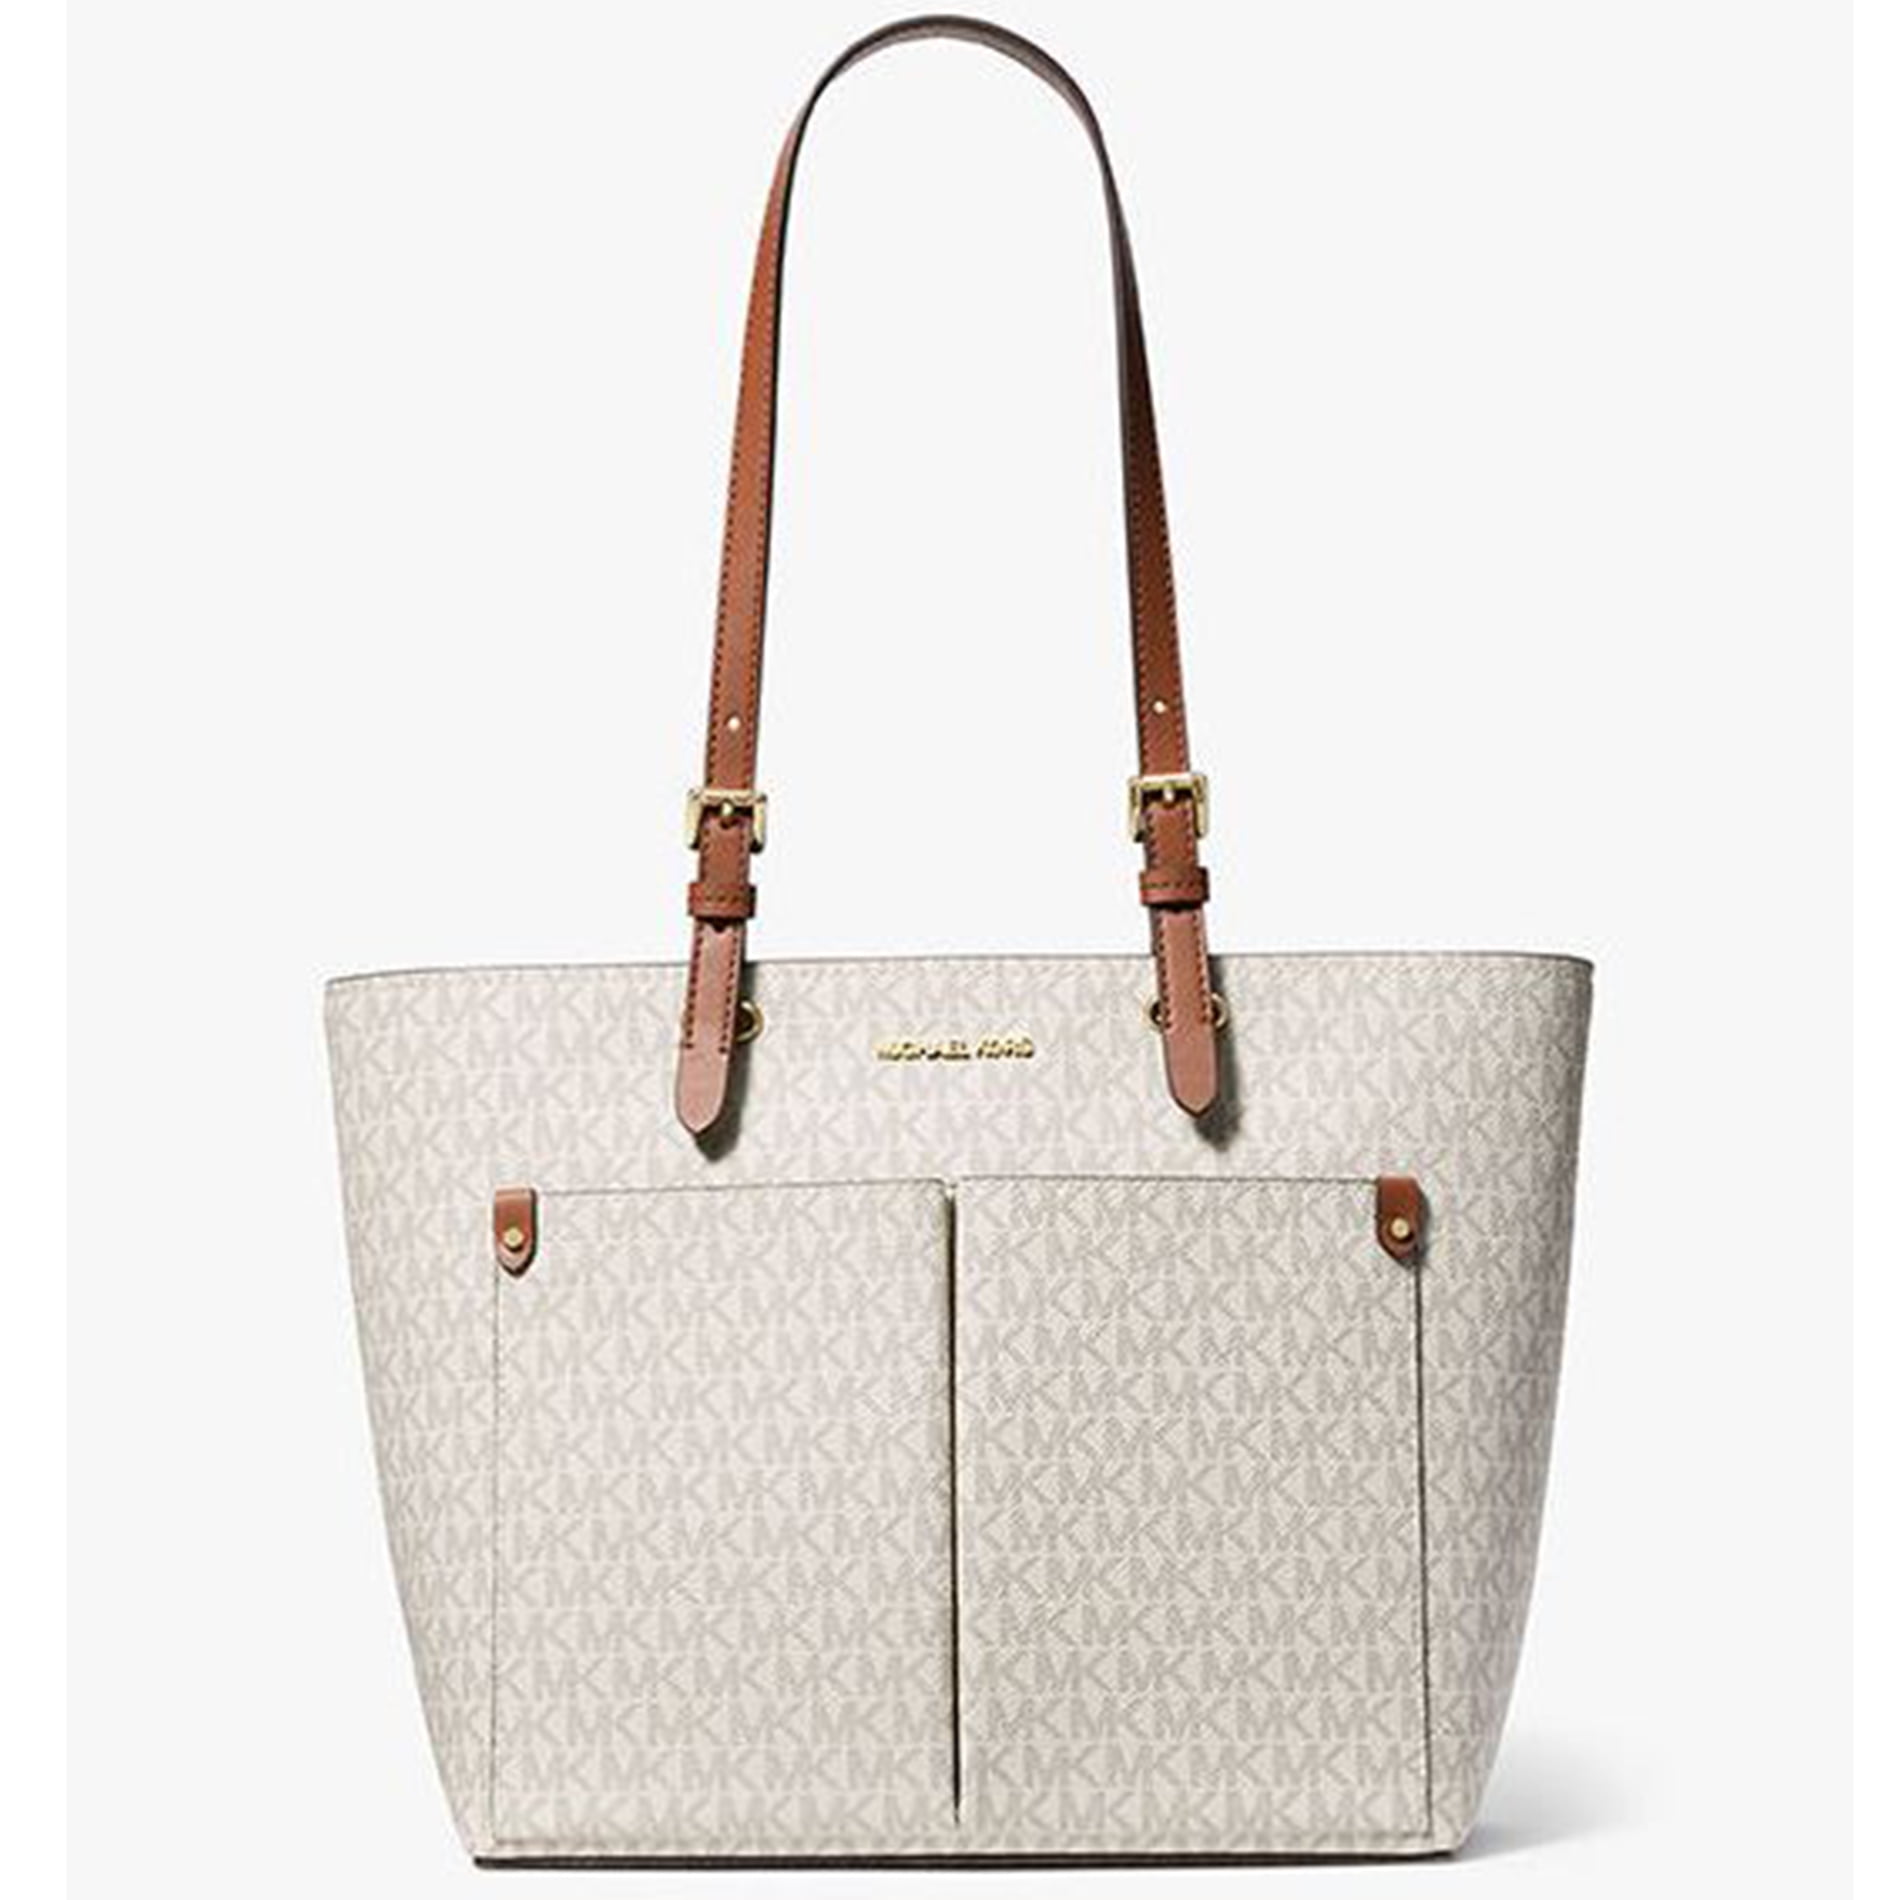 Michael Kors FREE tote bag with large spray purchase from the Michael Kors  Women's fragrance collection - Macy's